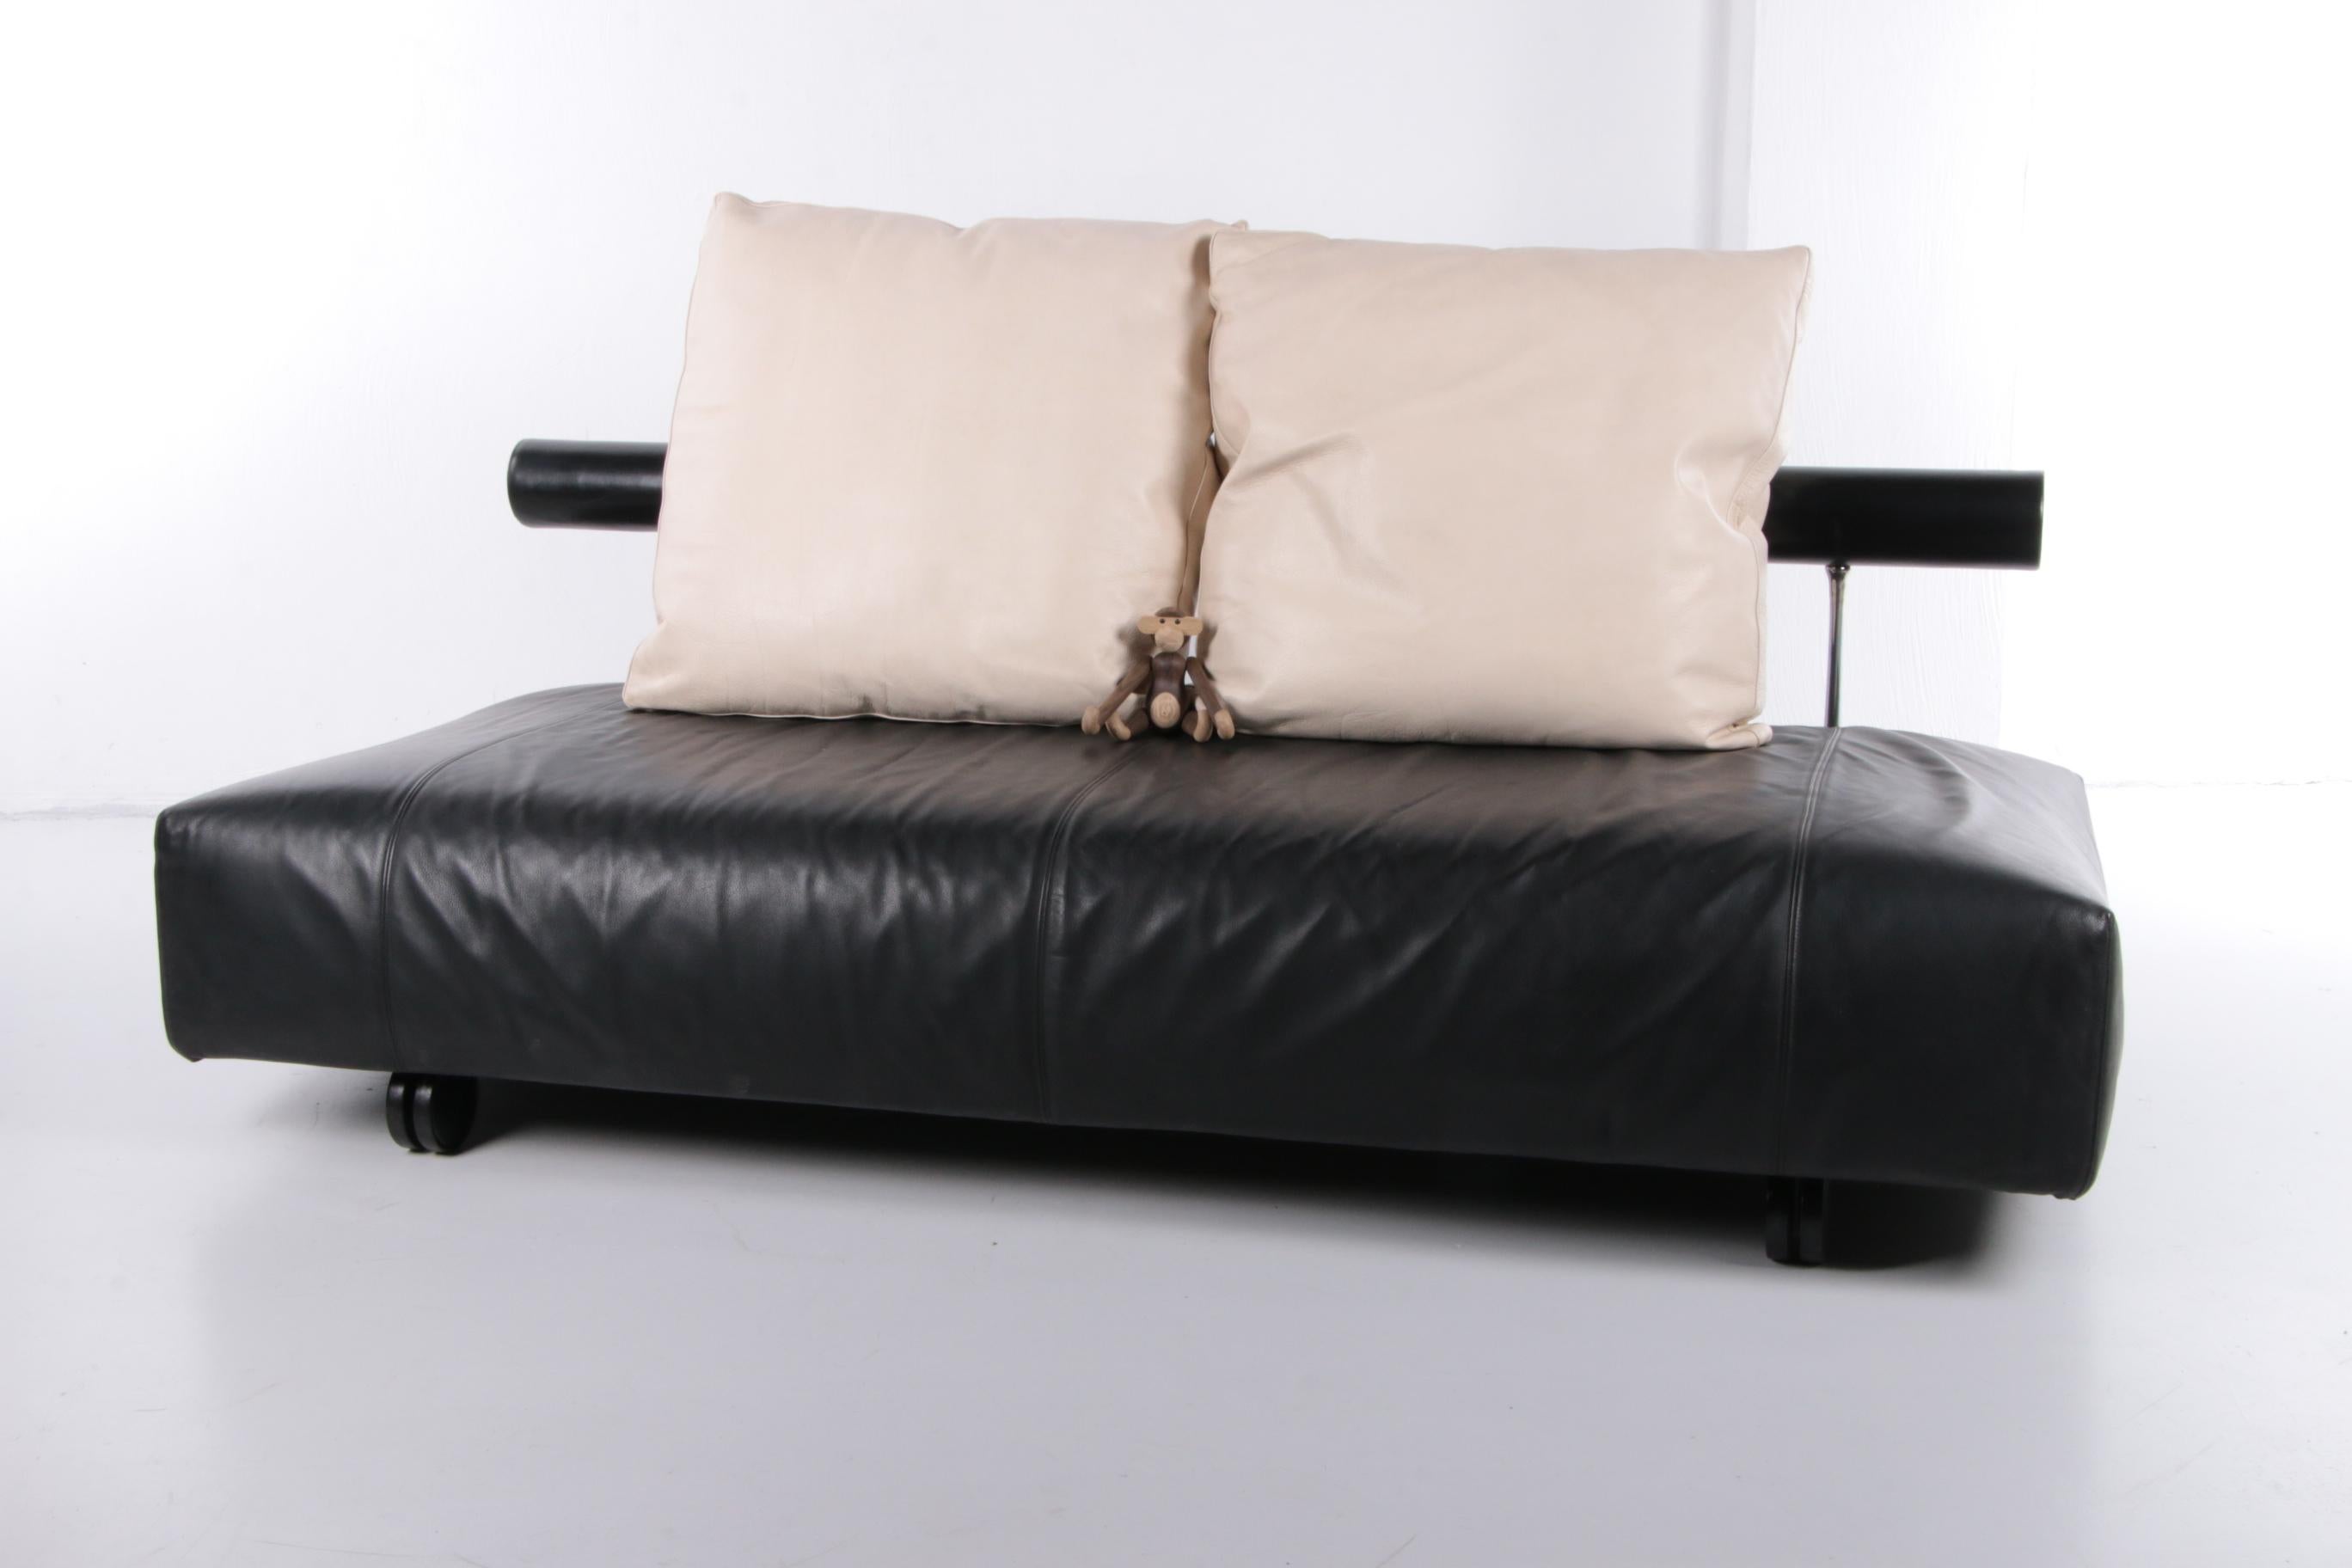 Beautiful quality sofa made of black and white leather. It has an interesting design with the minimalist backrest and the thick, comfortable cushions.

A brand is engraved on the back of the sofa. The brand can also be found on the back of the